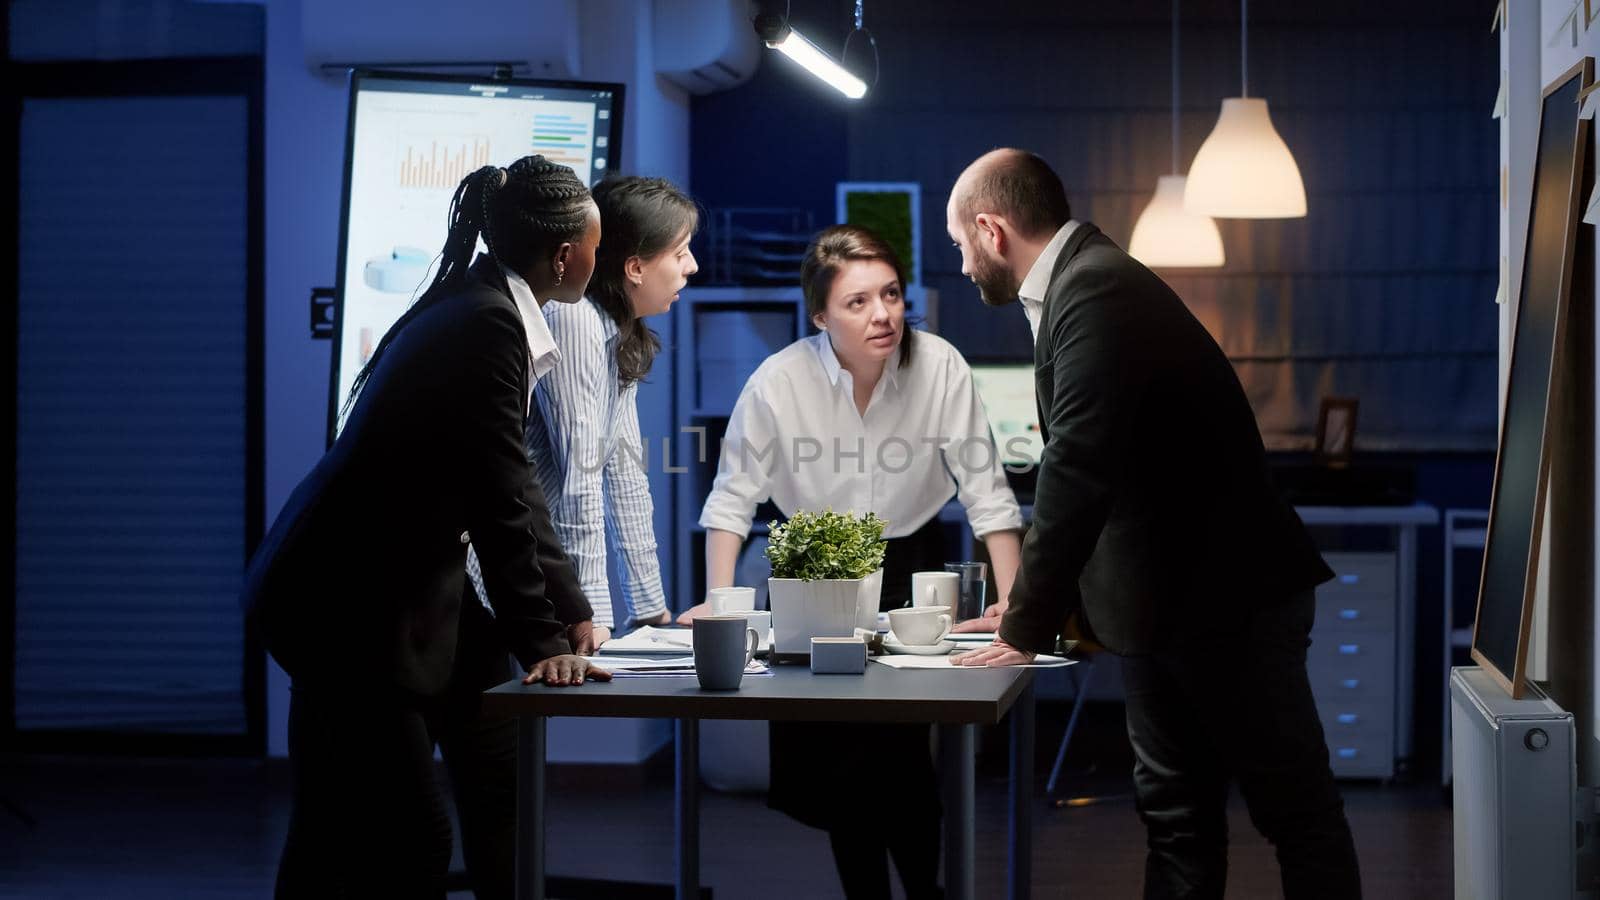 Diverse multi ethnic teamwork standing around conference table brainstorming ideas analyzing management paperwork. Focused coworkers planning company business presentation in meeting room